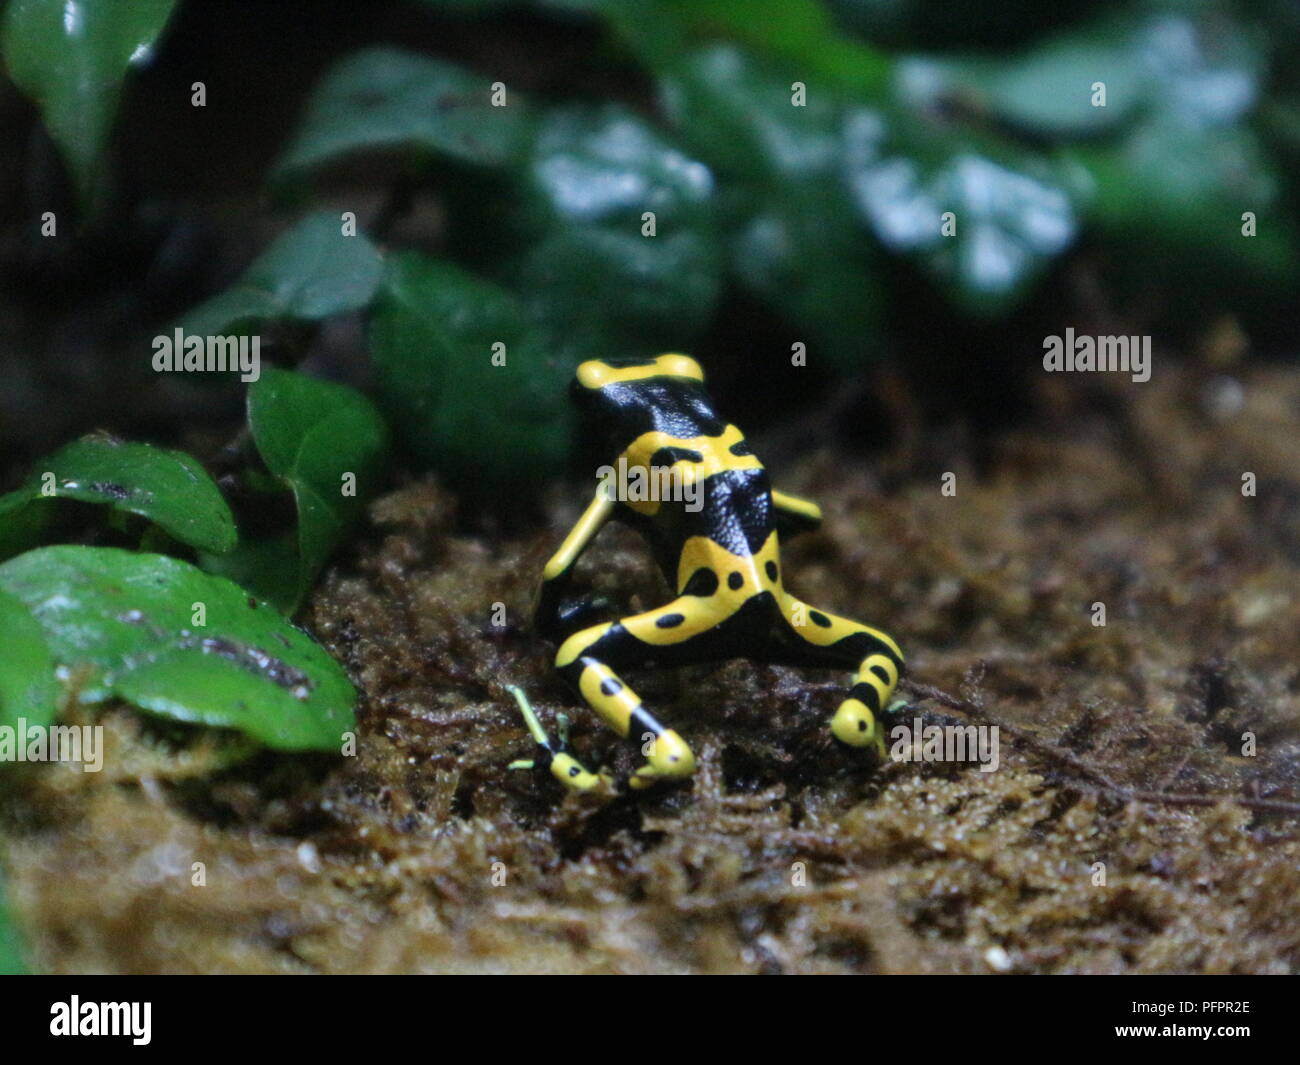 Small Poisonous Frogs Stock Photo